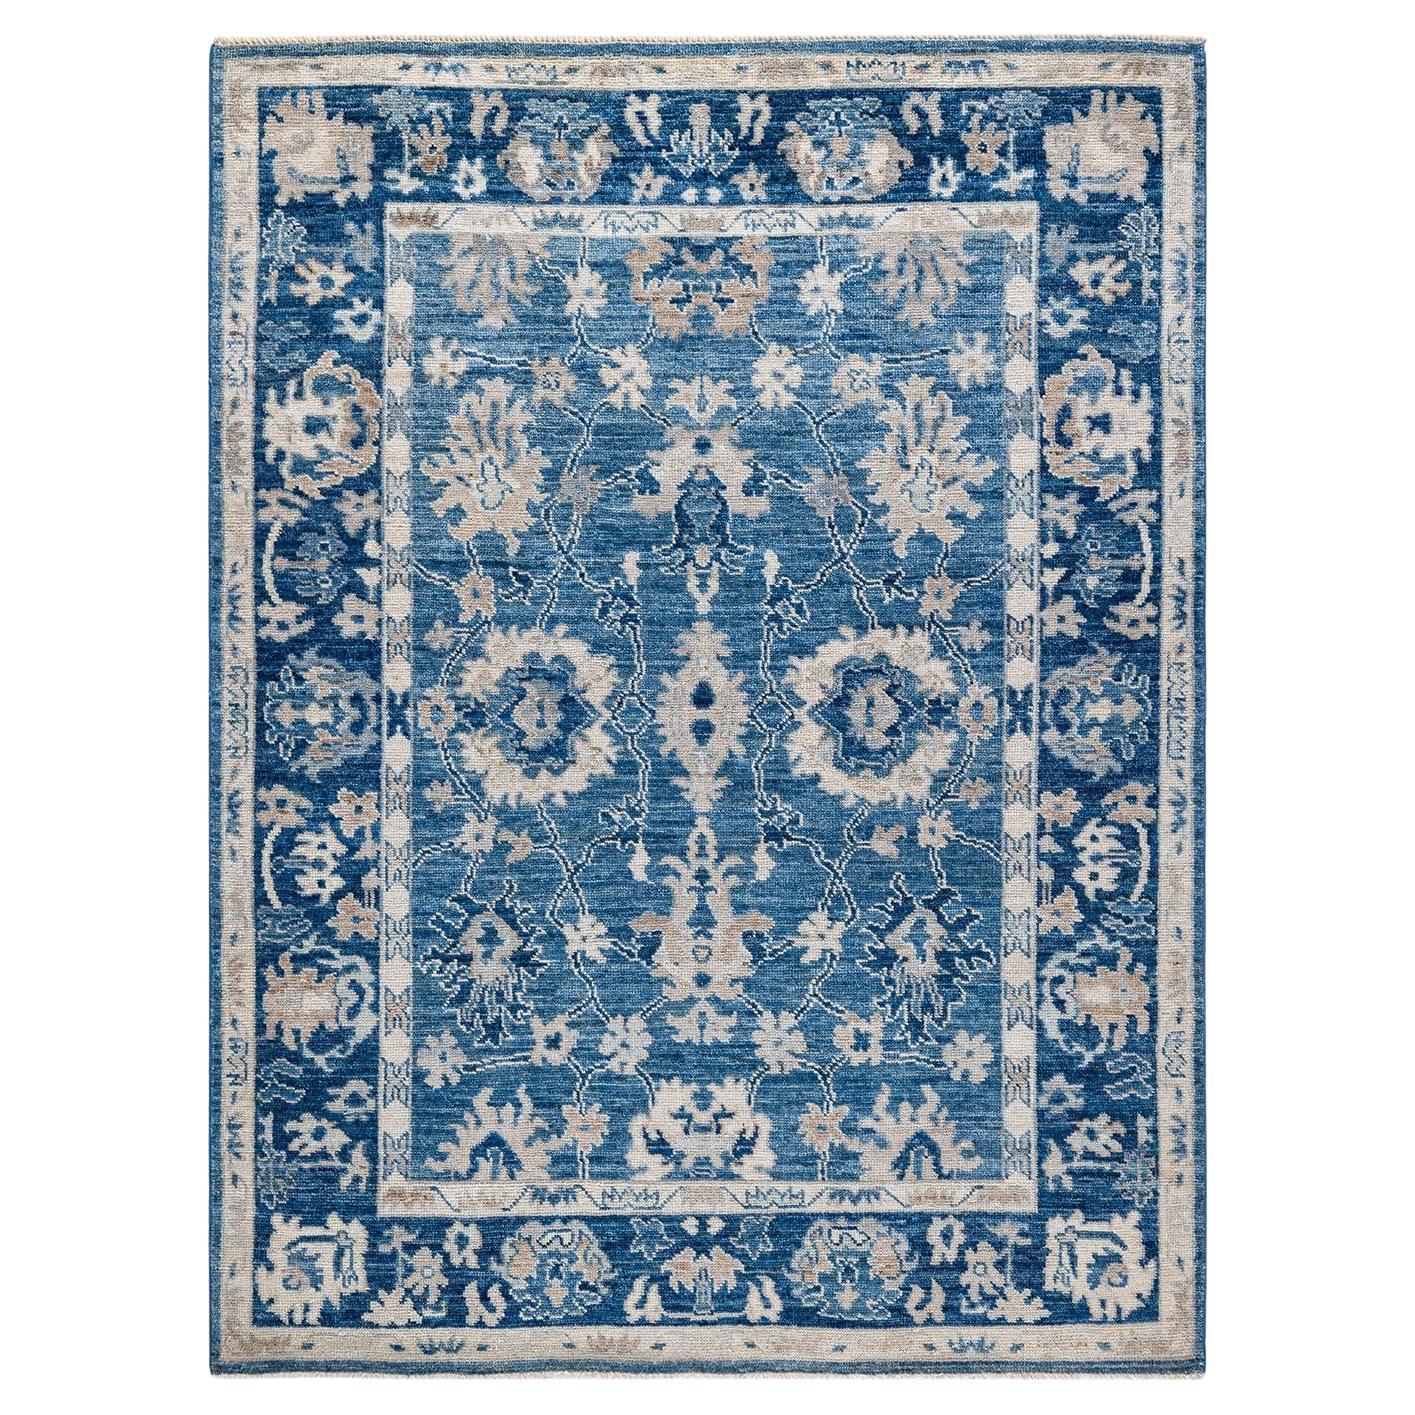 Oushak, One-of-a-kind Hand Knotted Runner Rug, Light Blue